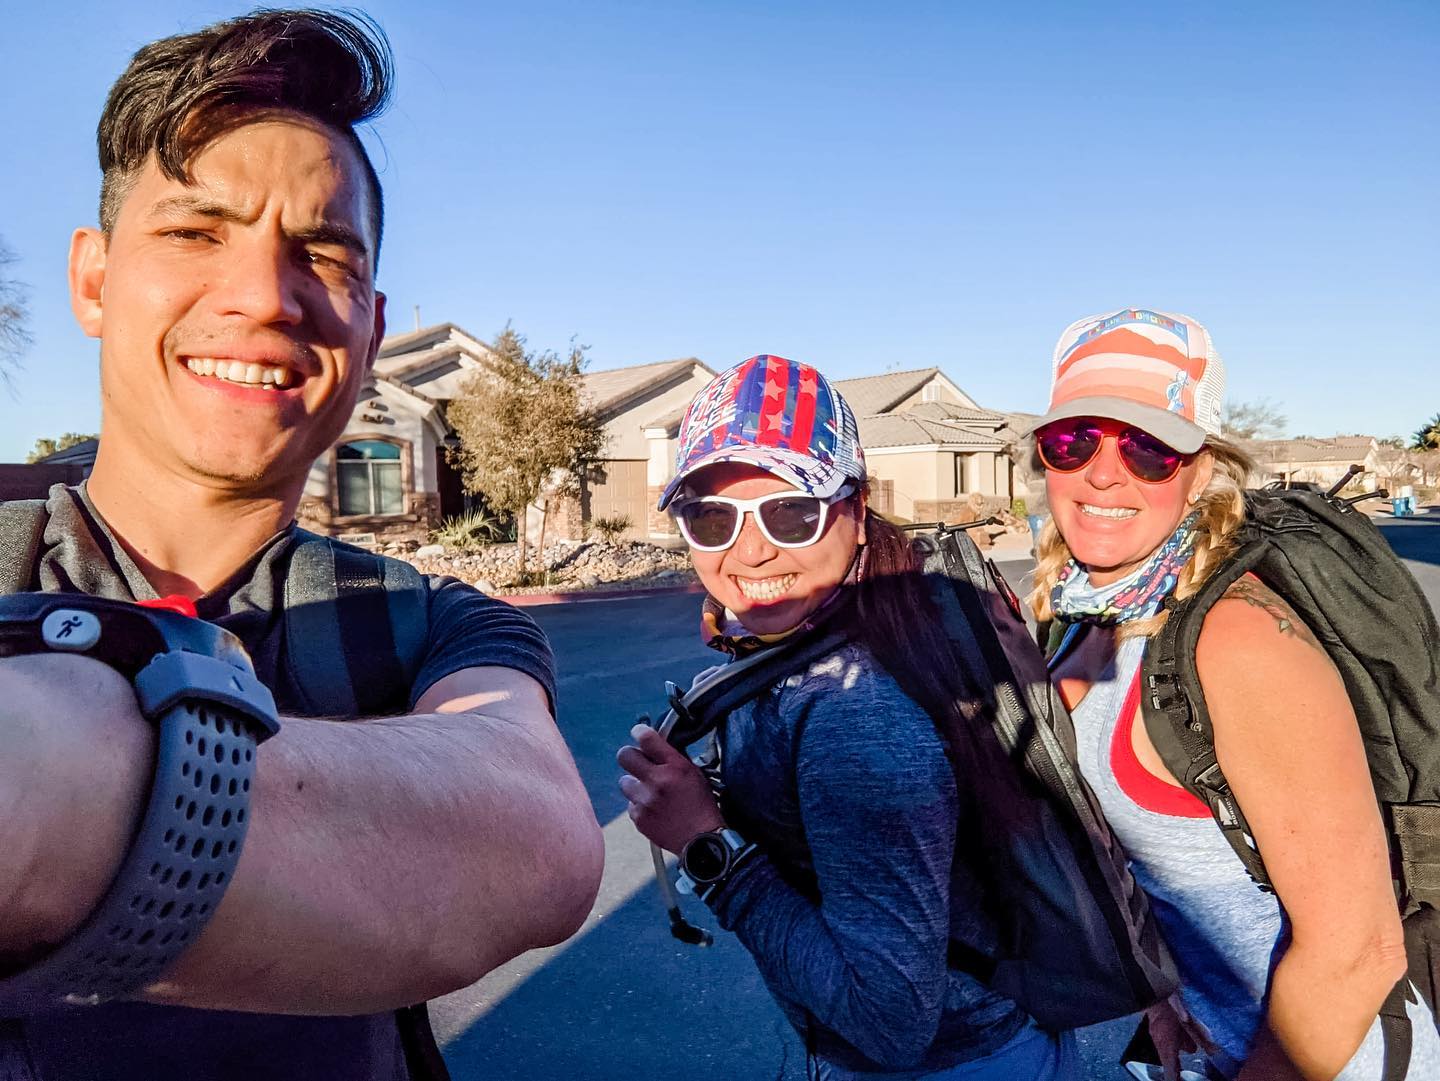 We ruck! 😎 Got the 4th and final 5-mile ruck in for the #GoRuckTribe February Challenge! @lvtrailjogger & @wining__runner set the pace so that we finished slightly faster than the previous ruck. We may have “jogged” the last mile w/ our 20lb #Rucker to make it 😬That explains why I was sore a day later (today). #goruck #ruckers #baseperformance #seekpain #goruckchallenge @lvtrailjogger [instagram]